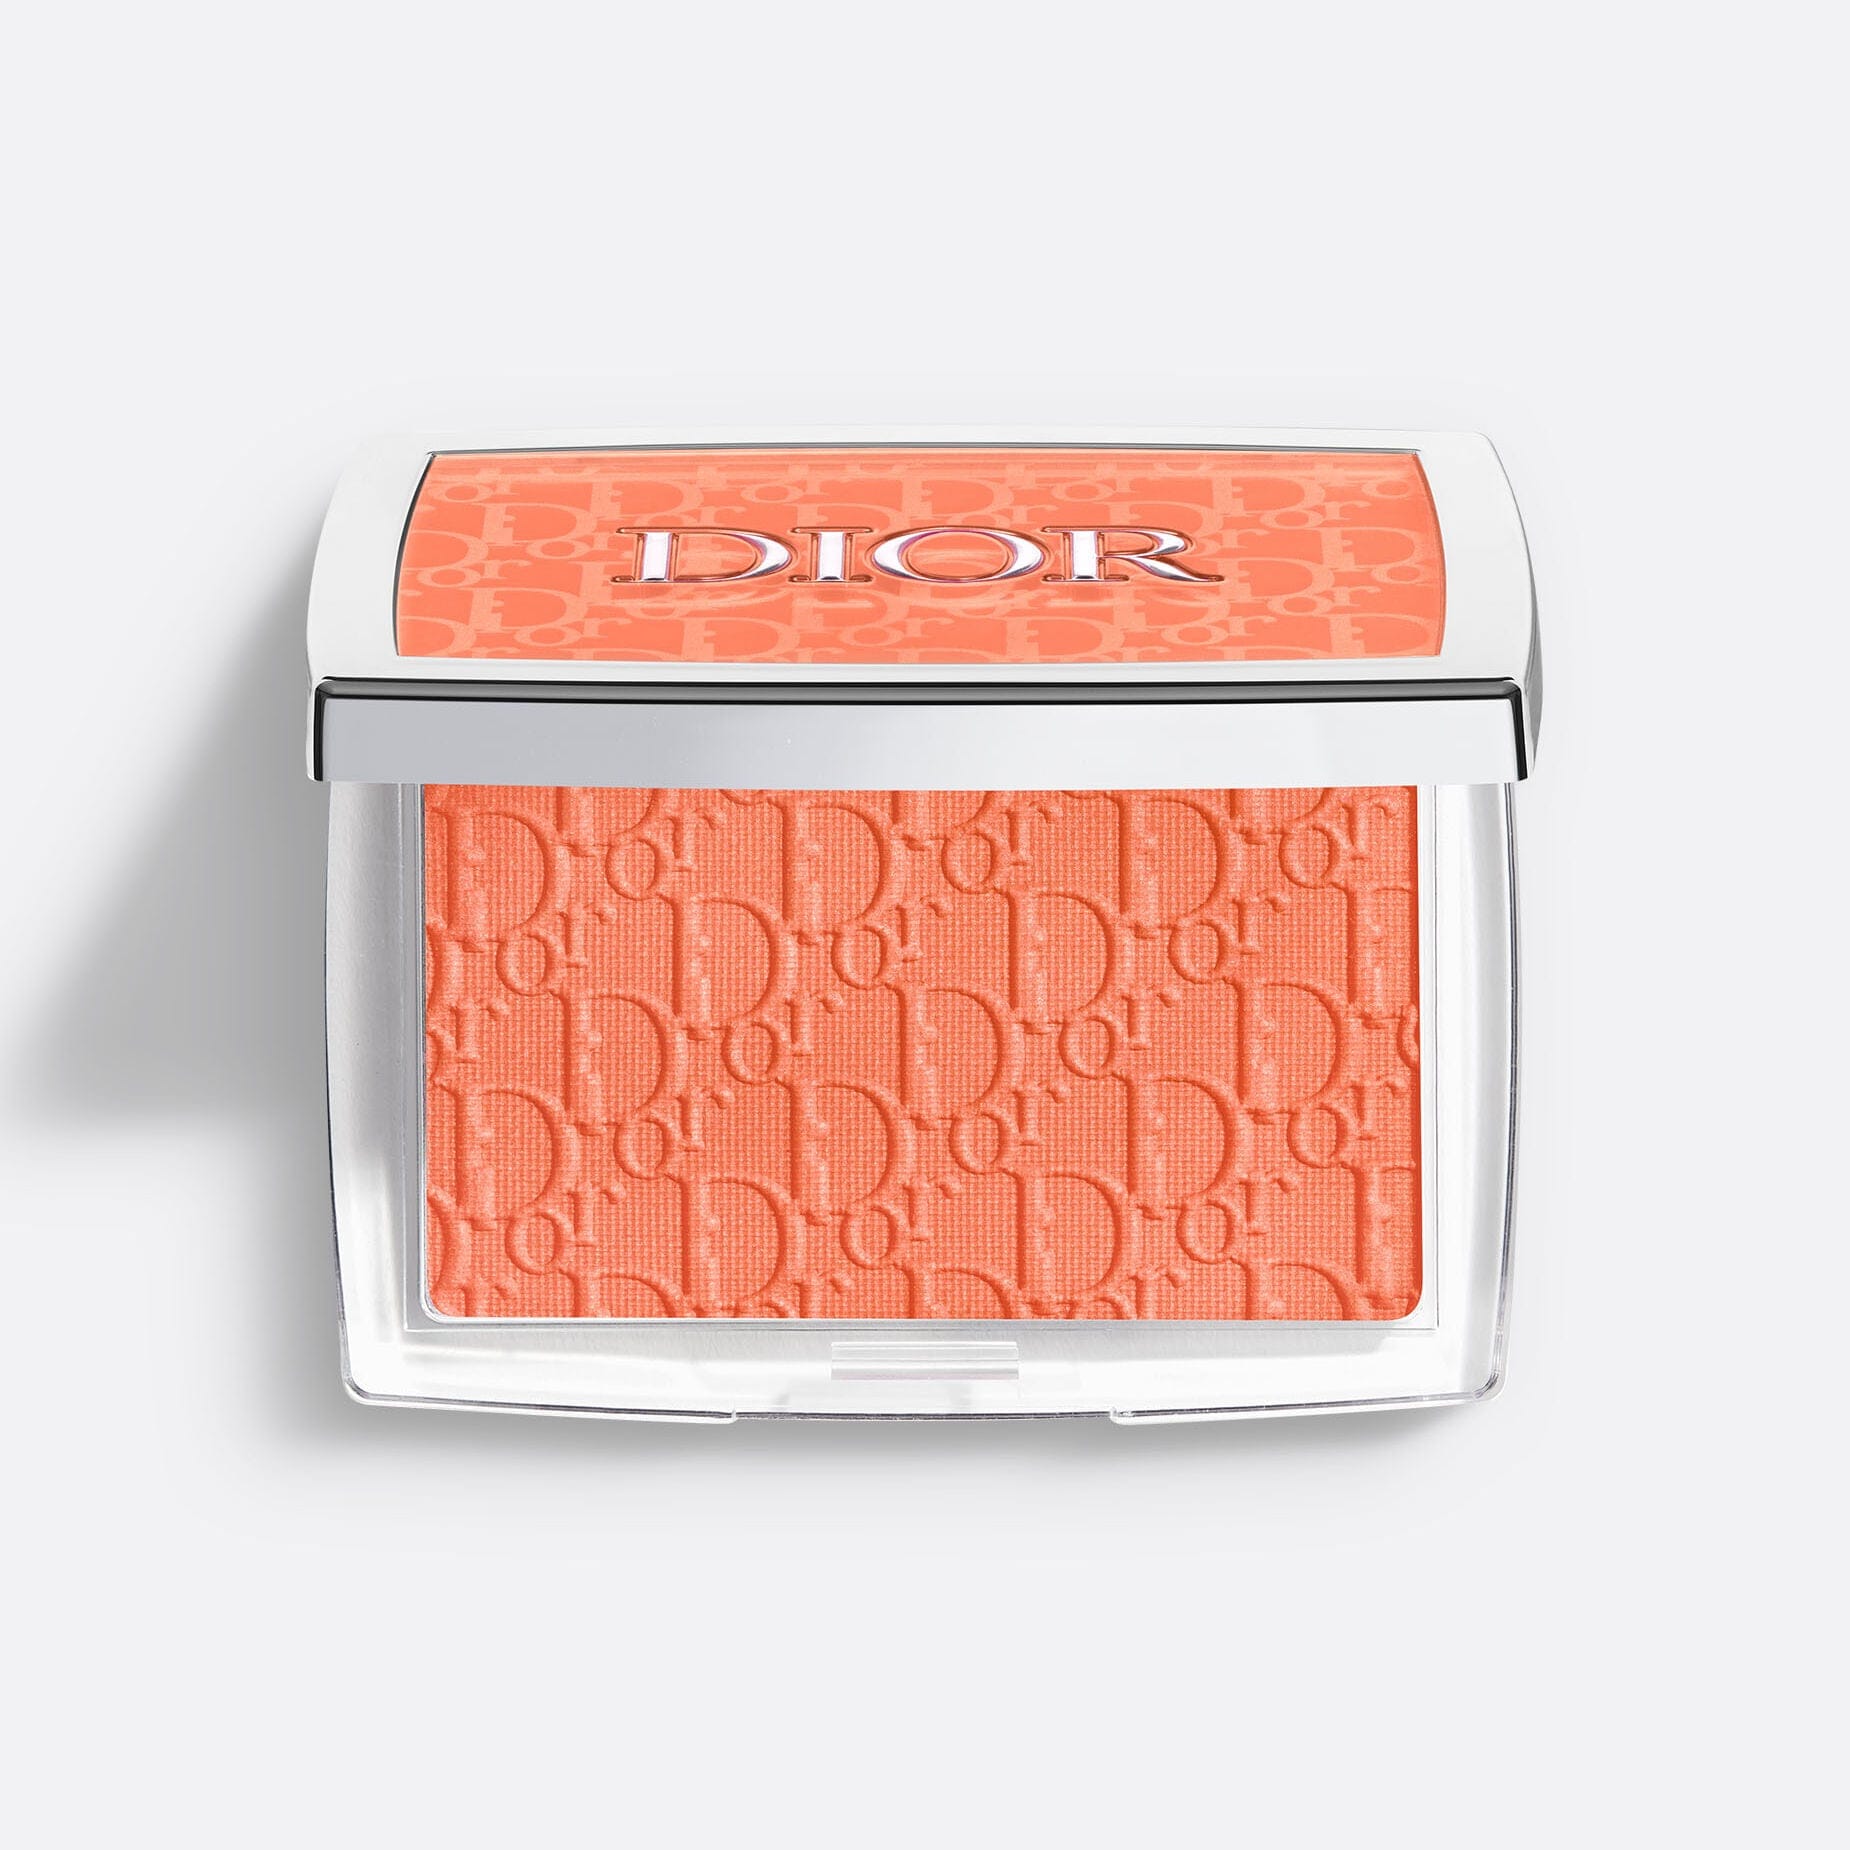 Dior Backstage Rosy Glow Blusher 004 Coral 4.4g Dior